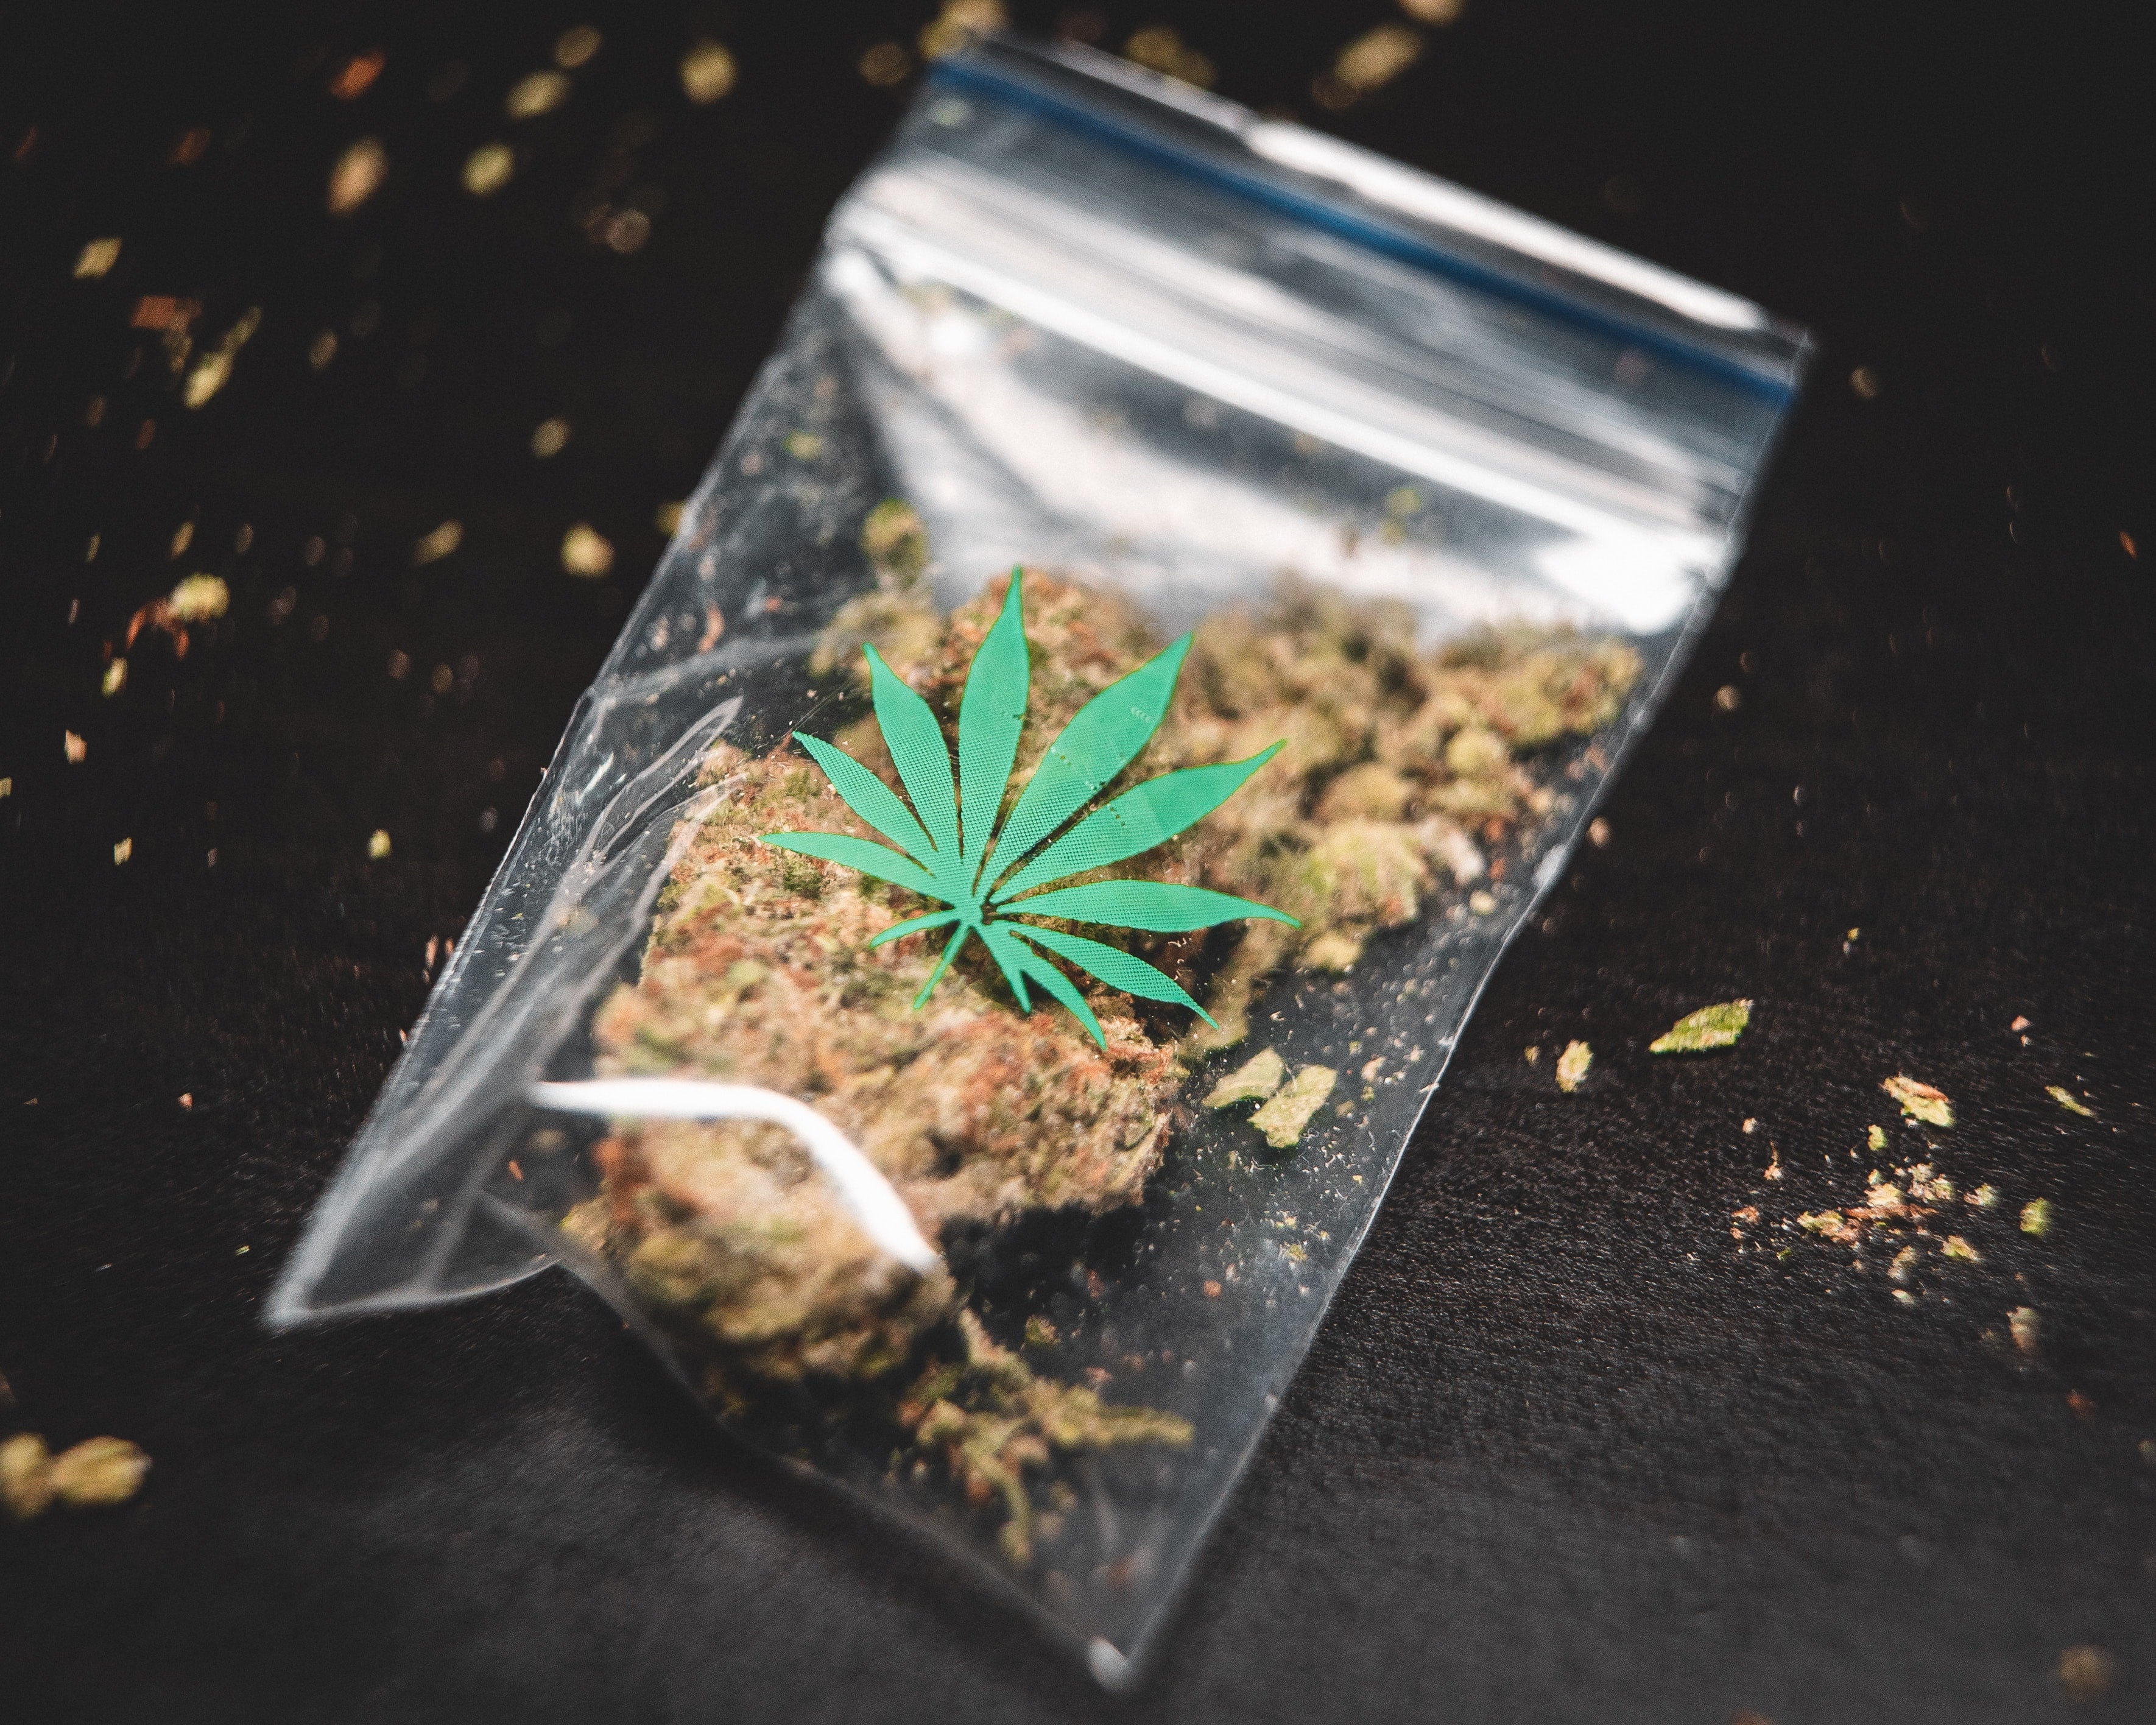 A small bag with a cannabis flower nug inside is from a specific strain of weed.